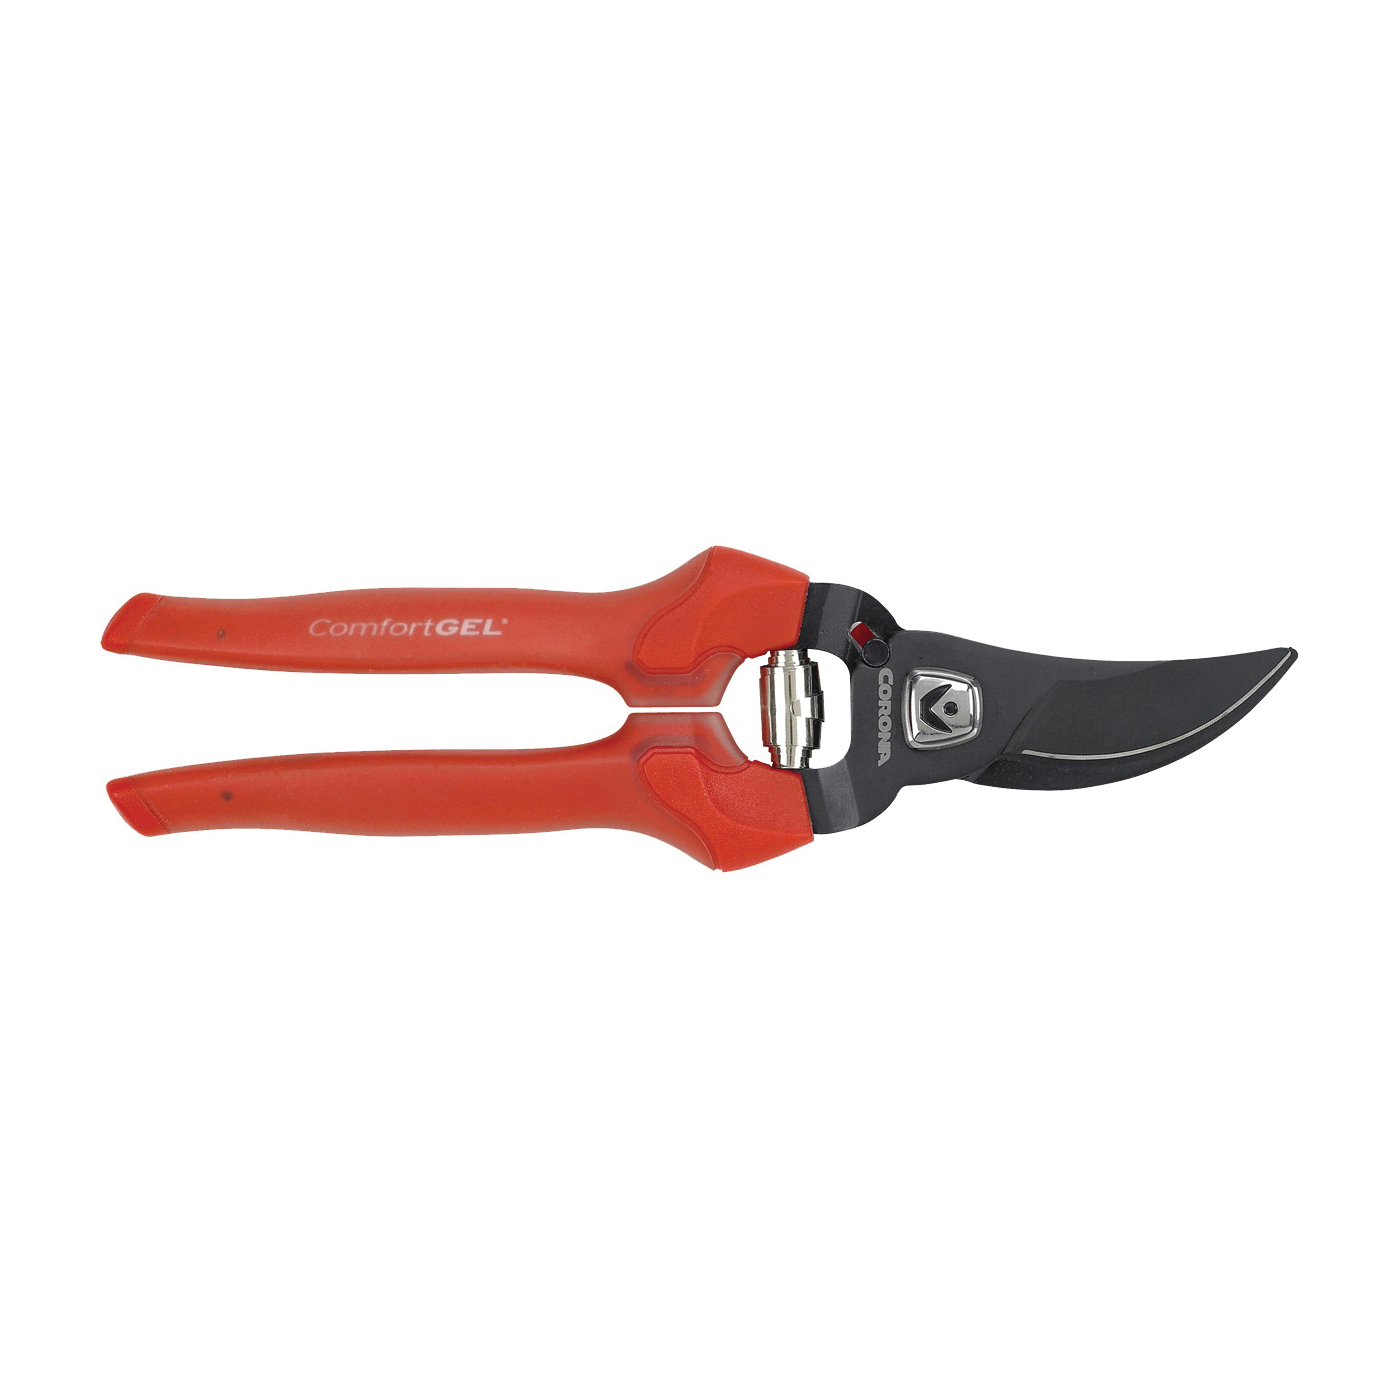 BP 3214D Pruning Shear, 3/4 in Cutting Capacity, Stainless Steel Blade, Bypass Blade